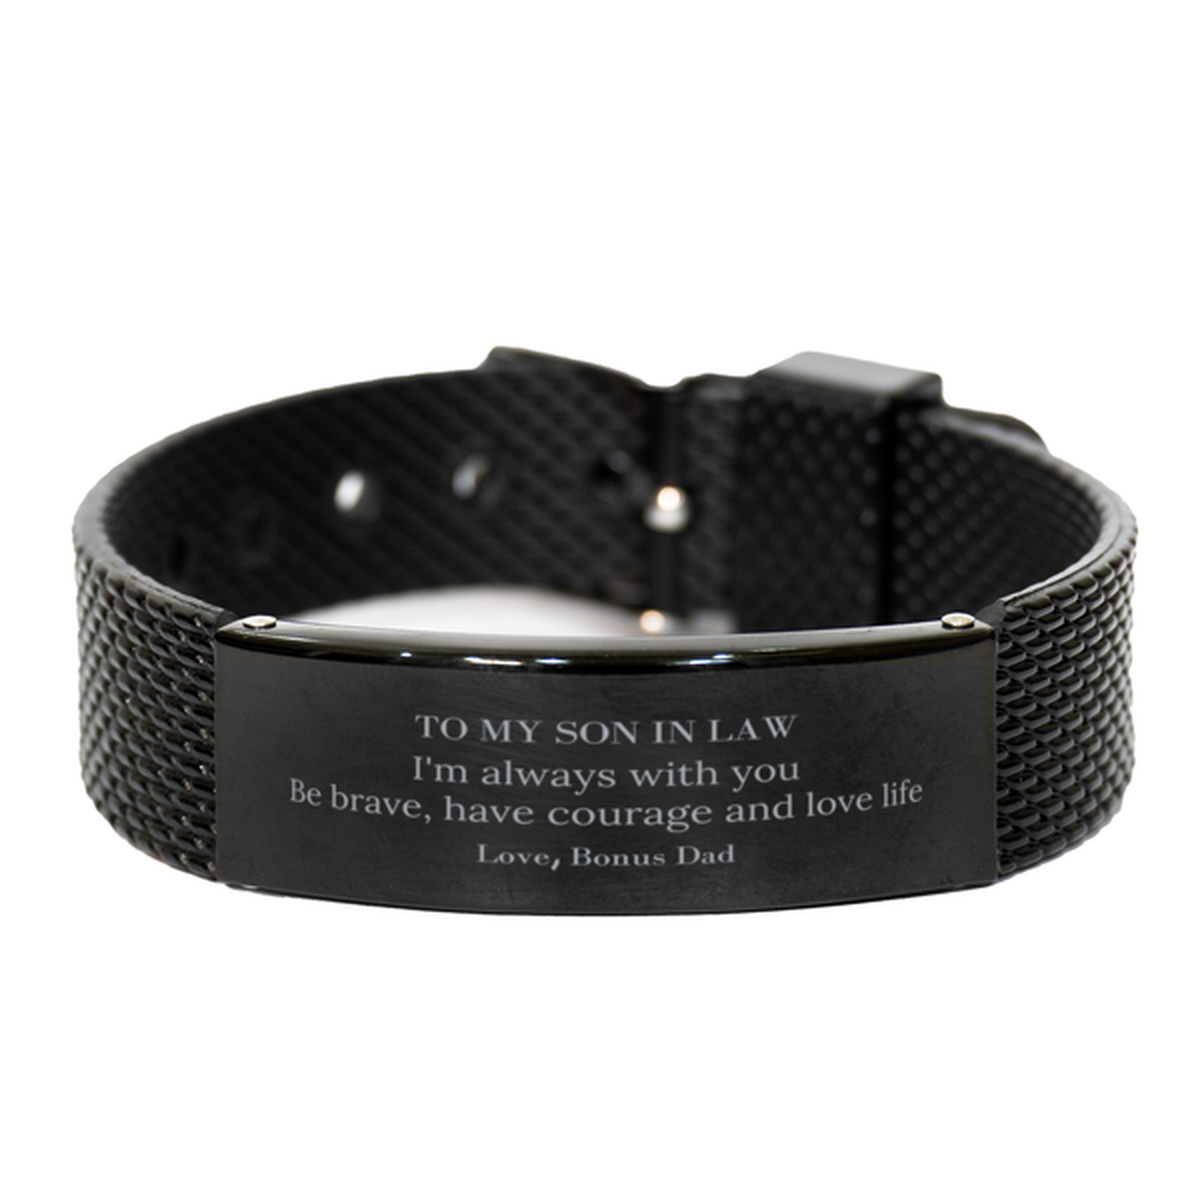 To My Son In Law Gifts from Bonus Dad, Unique Black Shark Mesh Bracelet Inspirational Christmas Birthday Graduation Gifts for Son In Law I'm always with you. Be brave, have courage and love life. Love, Bonus Dad